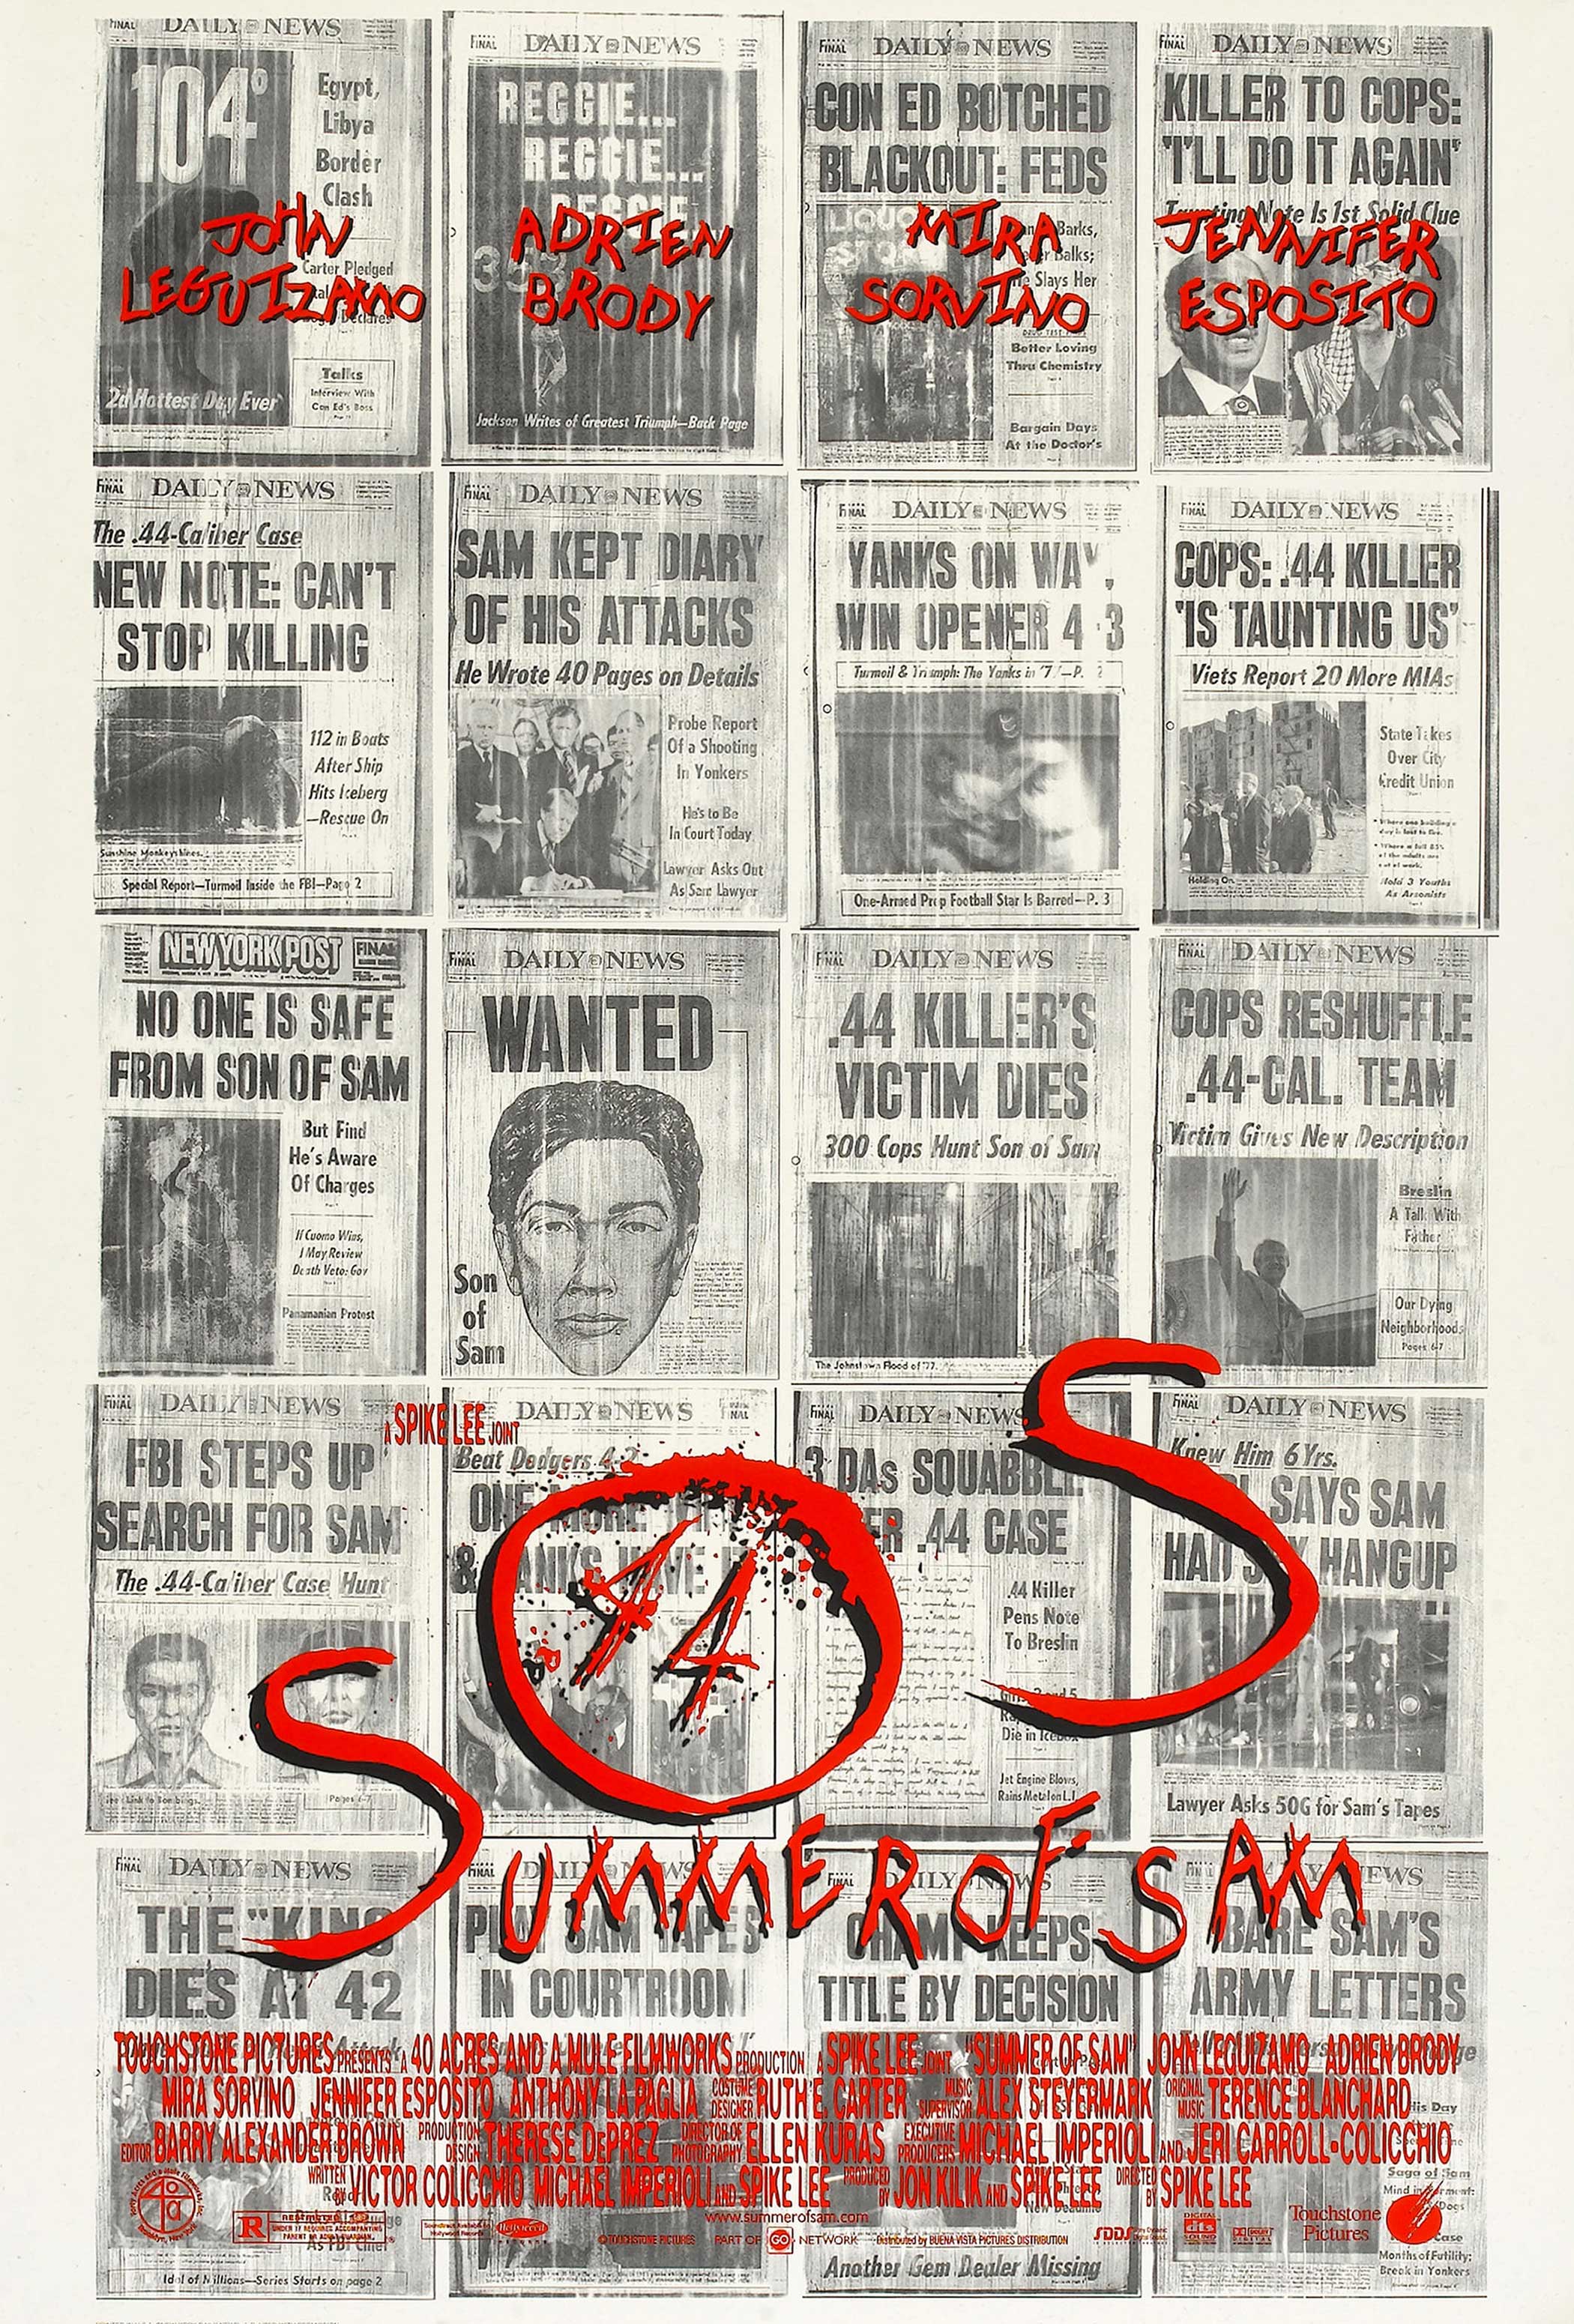 Summer of Sam, 1999 The Spike Lee-directed film is based on the infamous 1976/1977 killings by David Berkowitz in New York City. Berkowitz killed six victims and wounded seven others, claiming that he obeyed orders from his neighbor's dog.